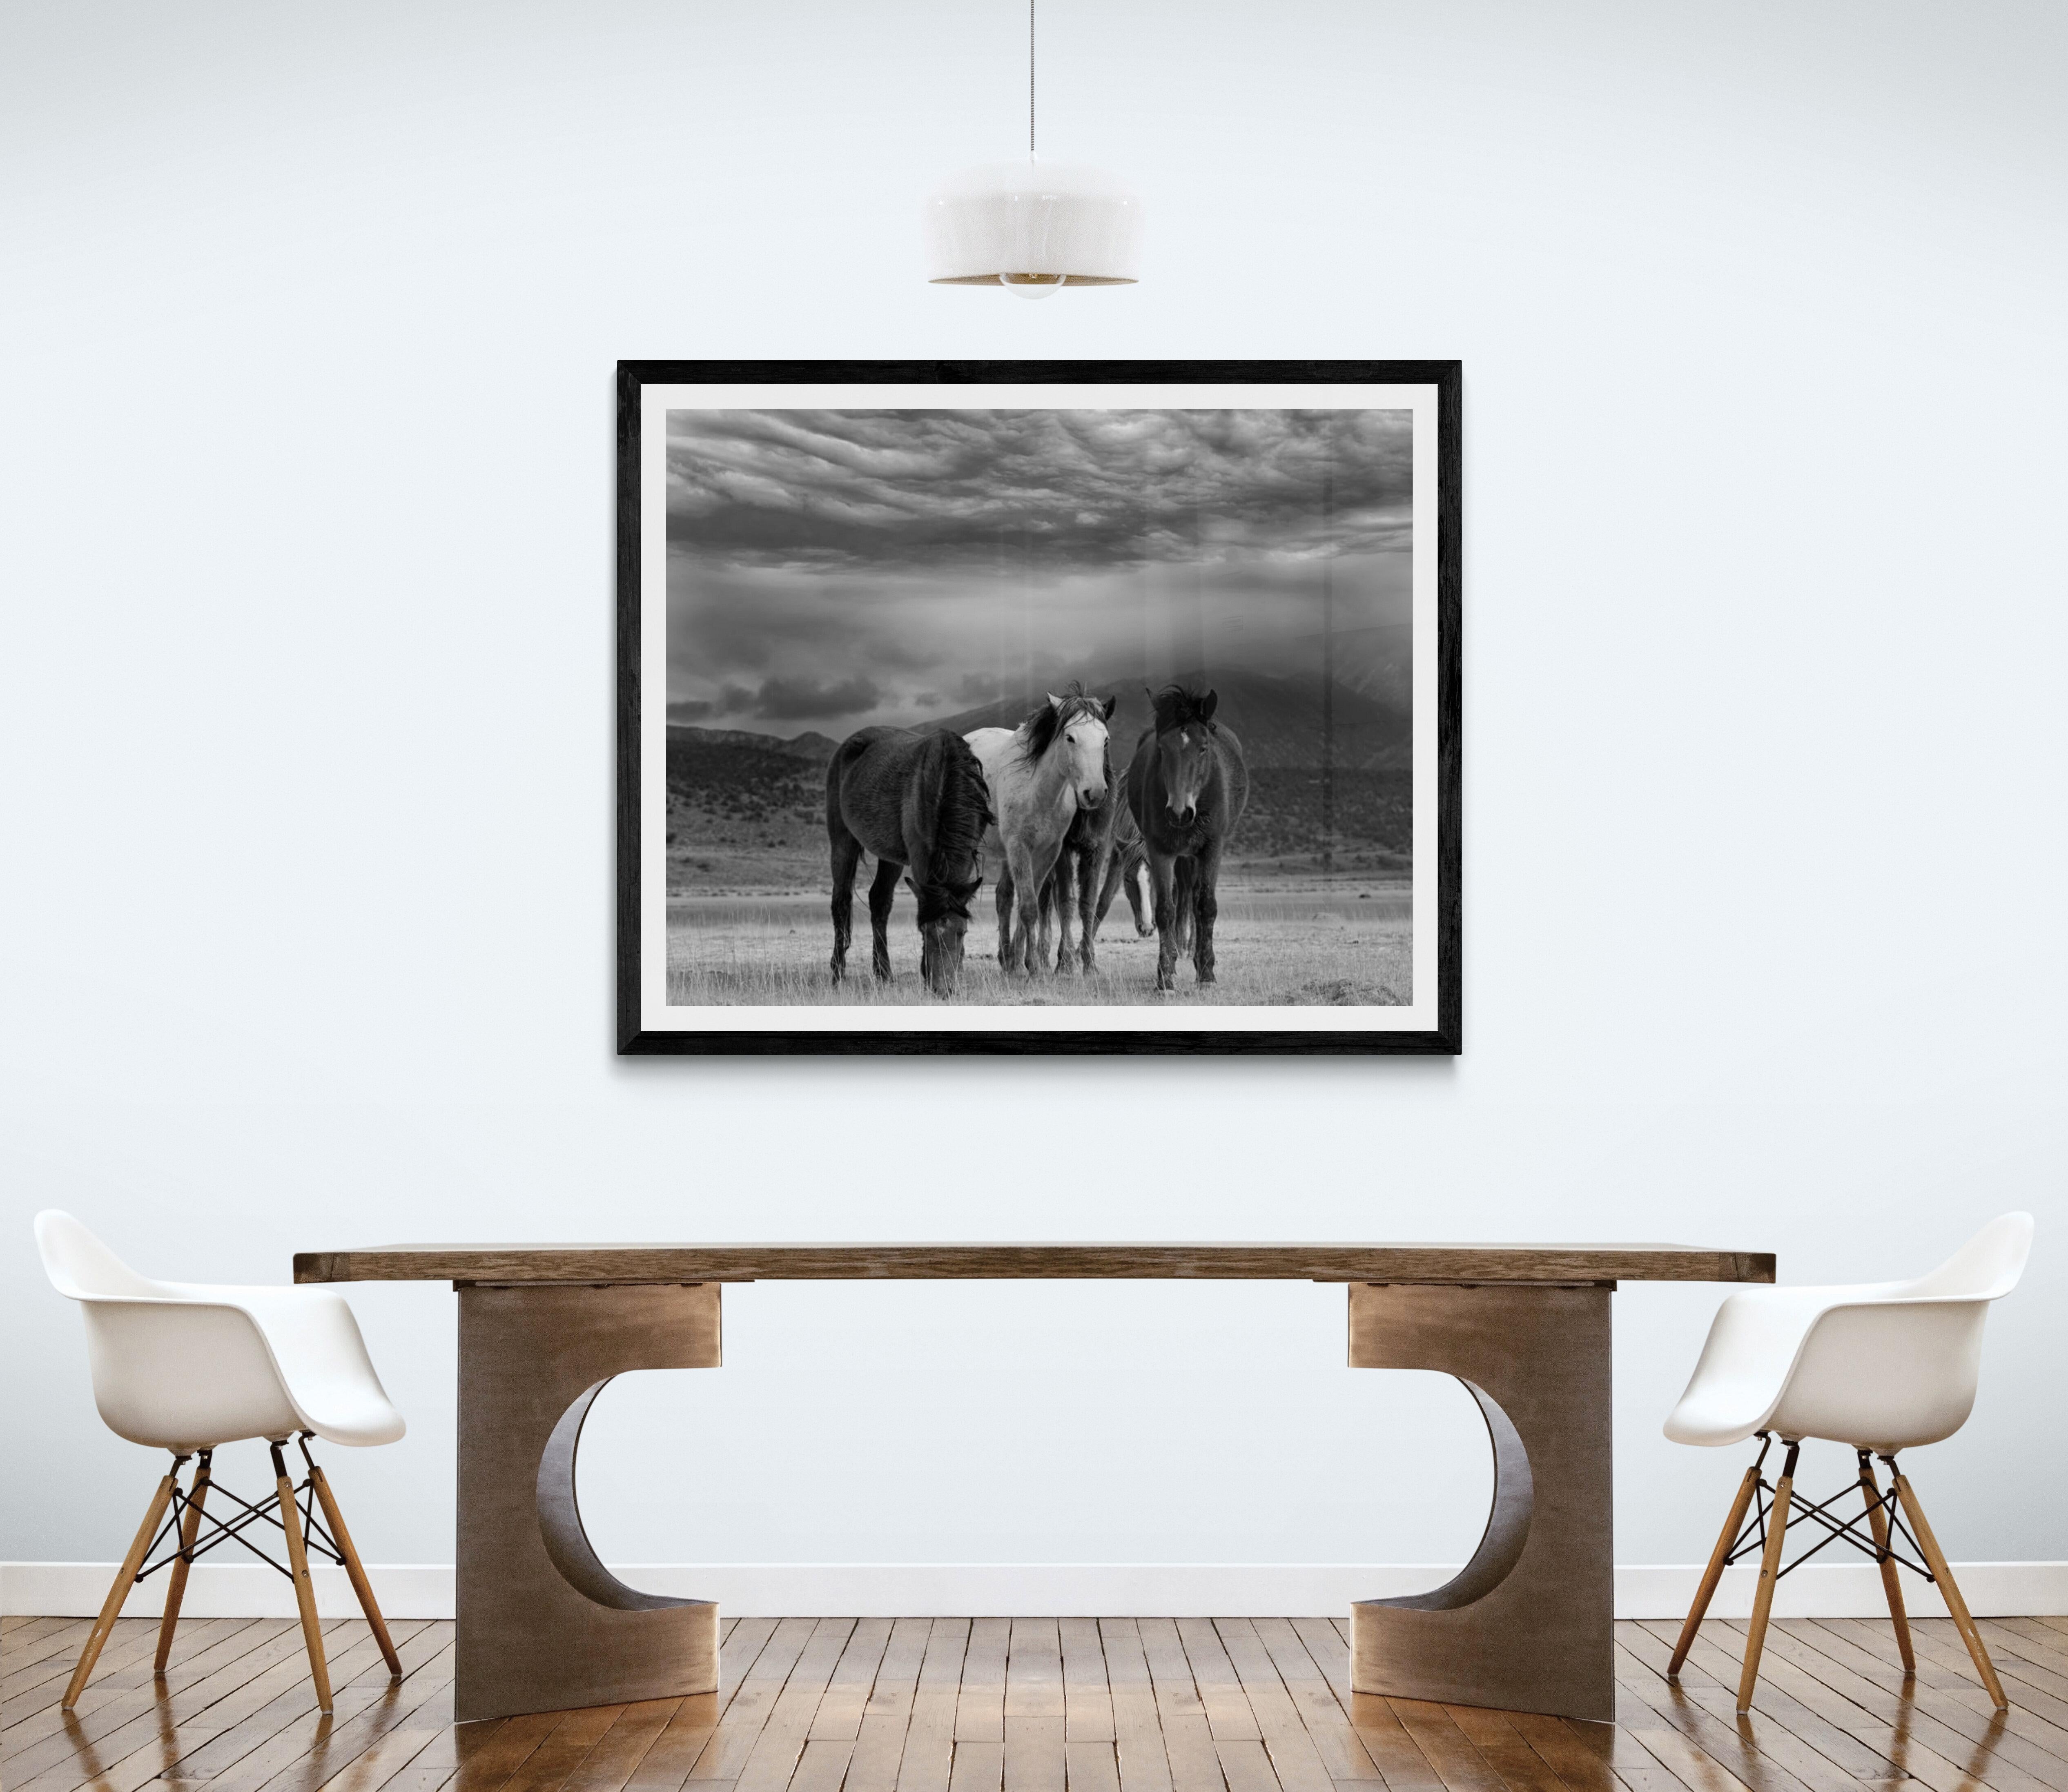 This is a contemporary black and white photograph of North American Wild Horses
Photography by Shane Russeck
Printed on archival paper 
Framing available. Inquire for rates. 

 Shane Russeck has built a reputation for capturing America's landscapes,